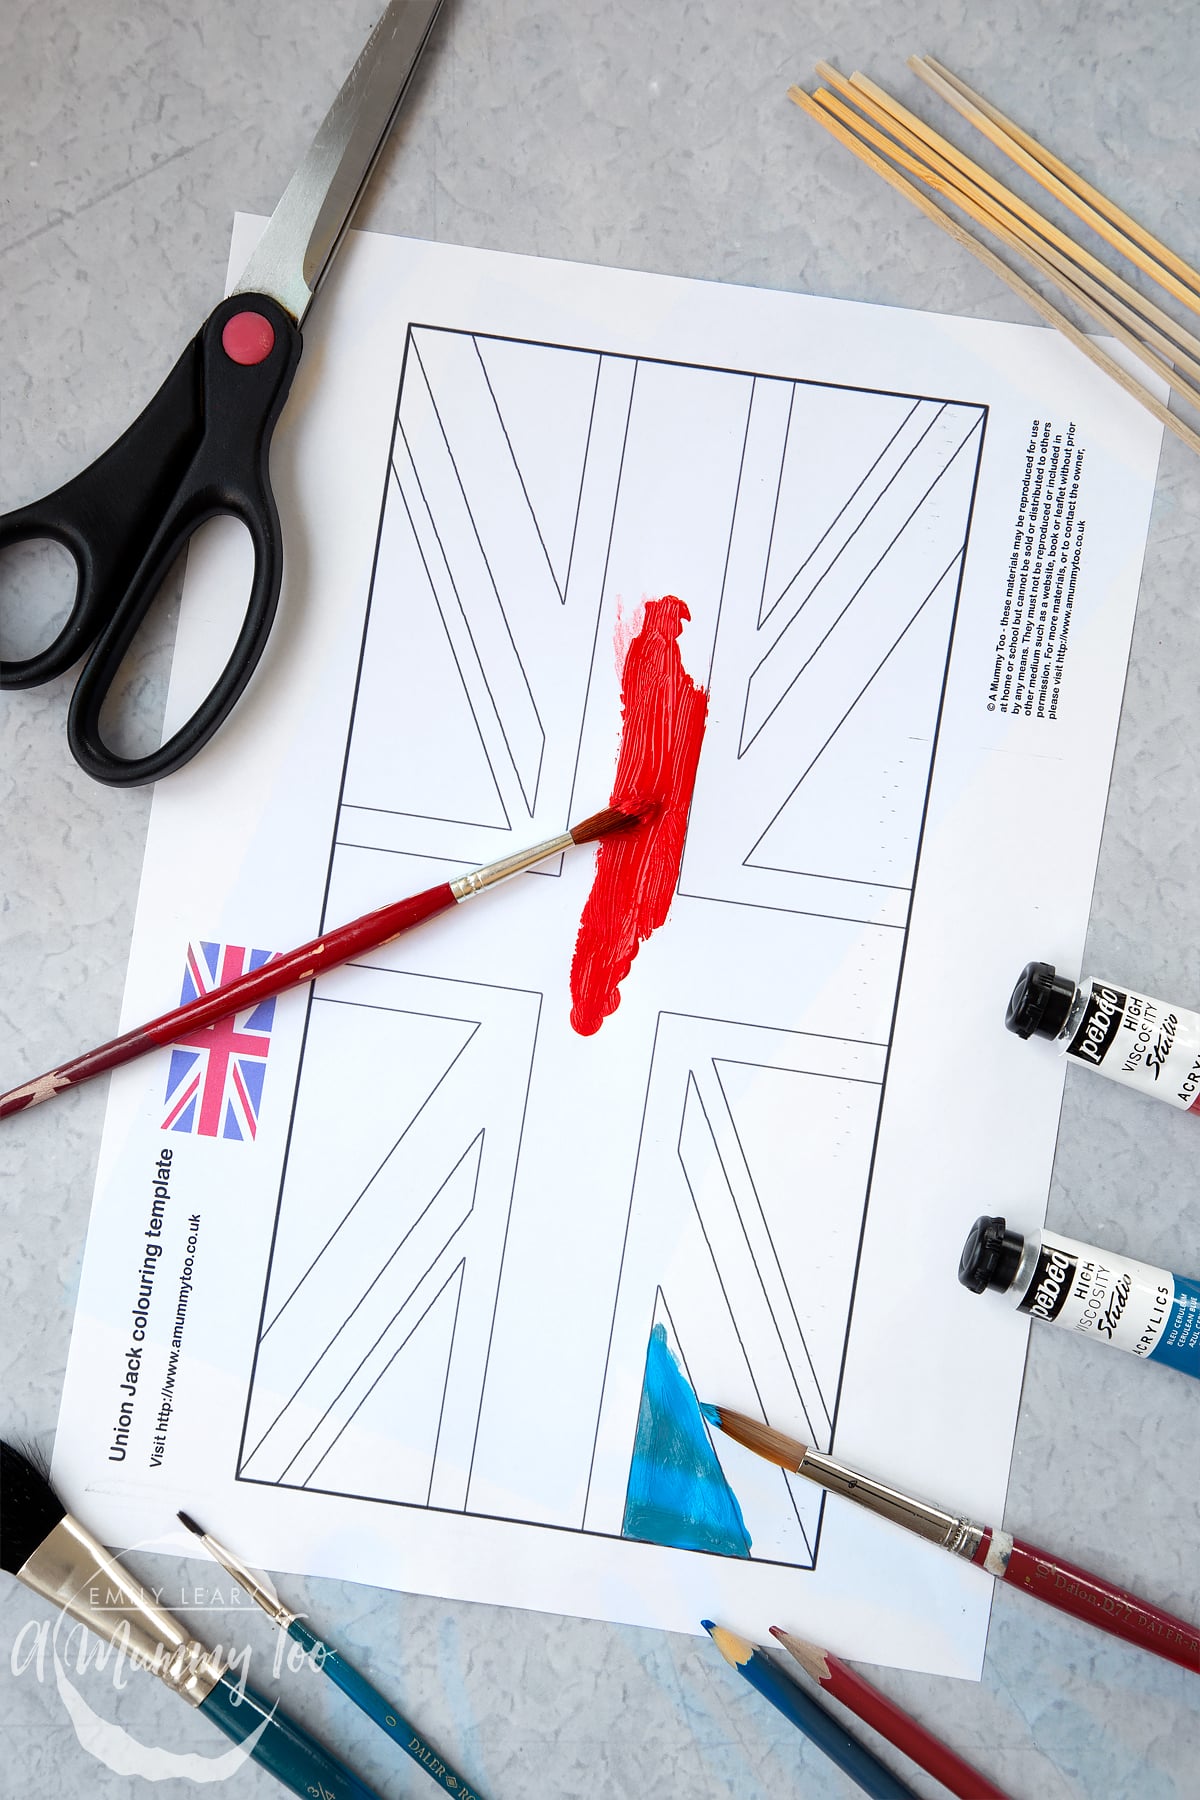 union jack flag printed onto A4 paper with scissors, glue and wooden sticks around the edges and red paint painting the paper